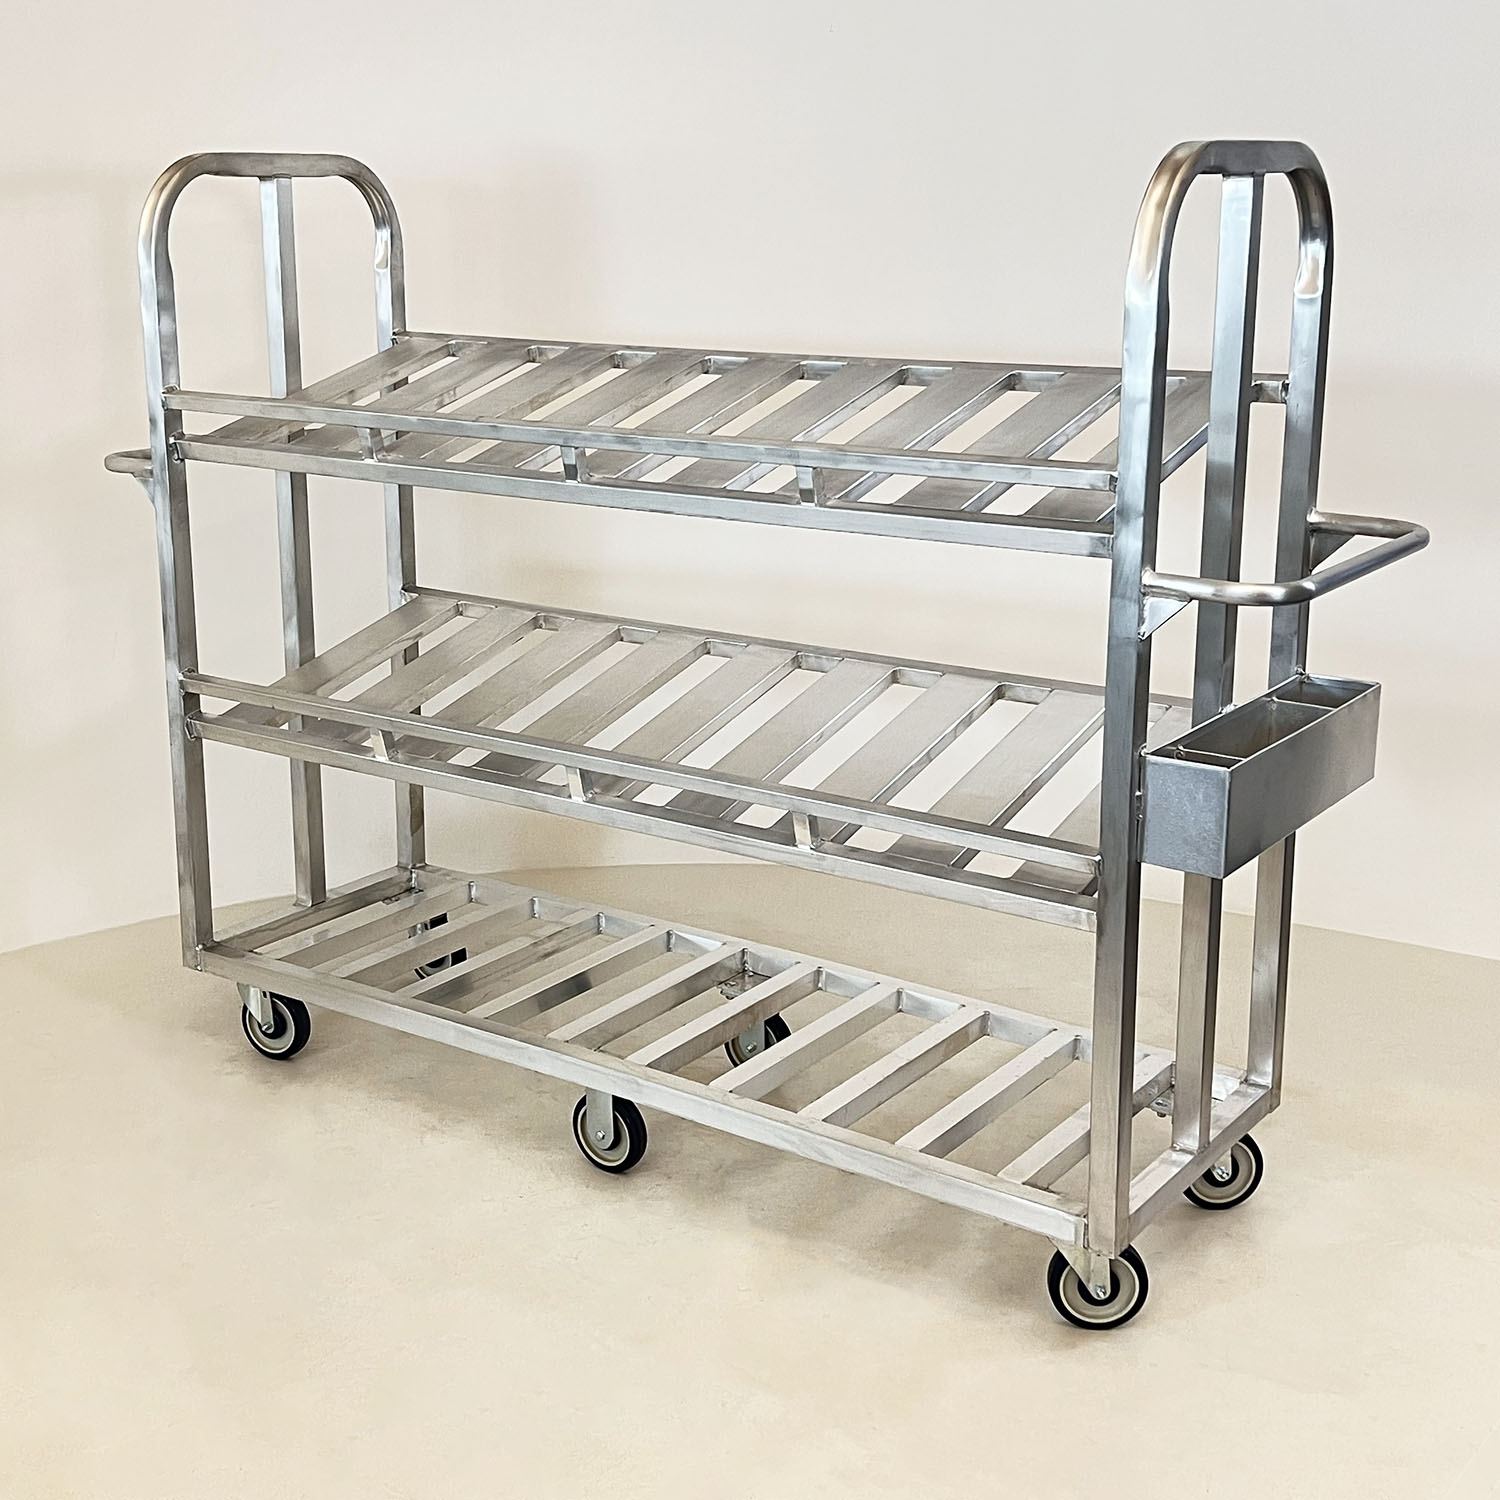 3 slant shelf picking cart Picking Cart Keeps Products Secured. The slant shelving with retention bar keeps items contained.